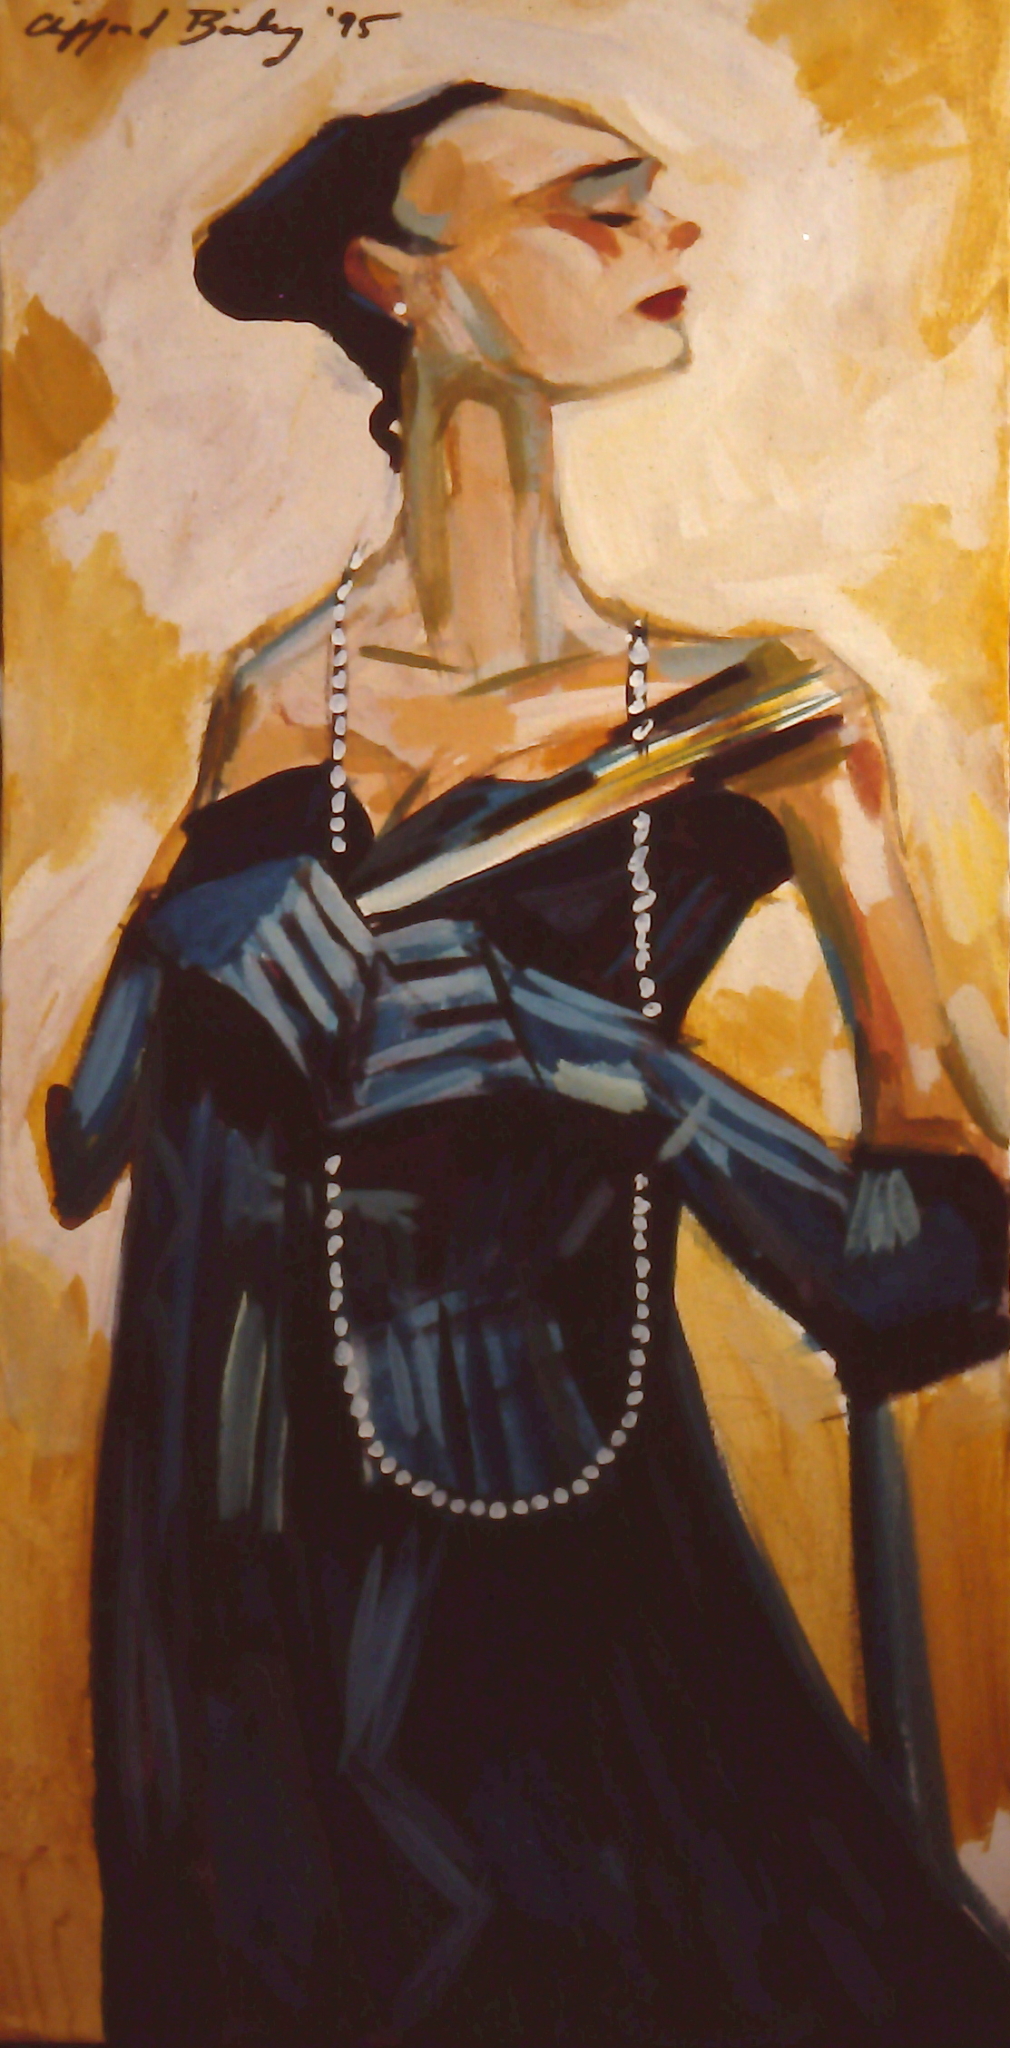 "Pearls" by Clifford Bailey Fine Art